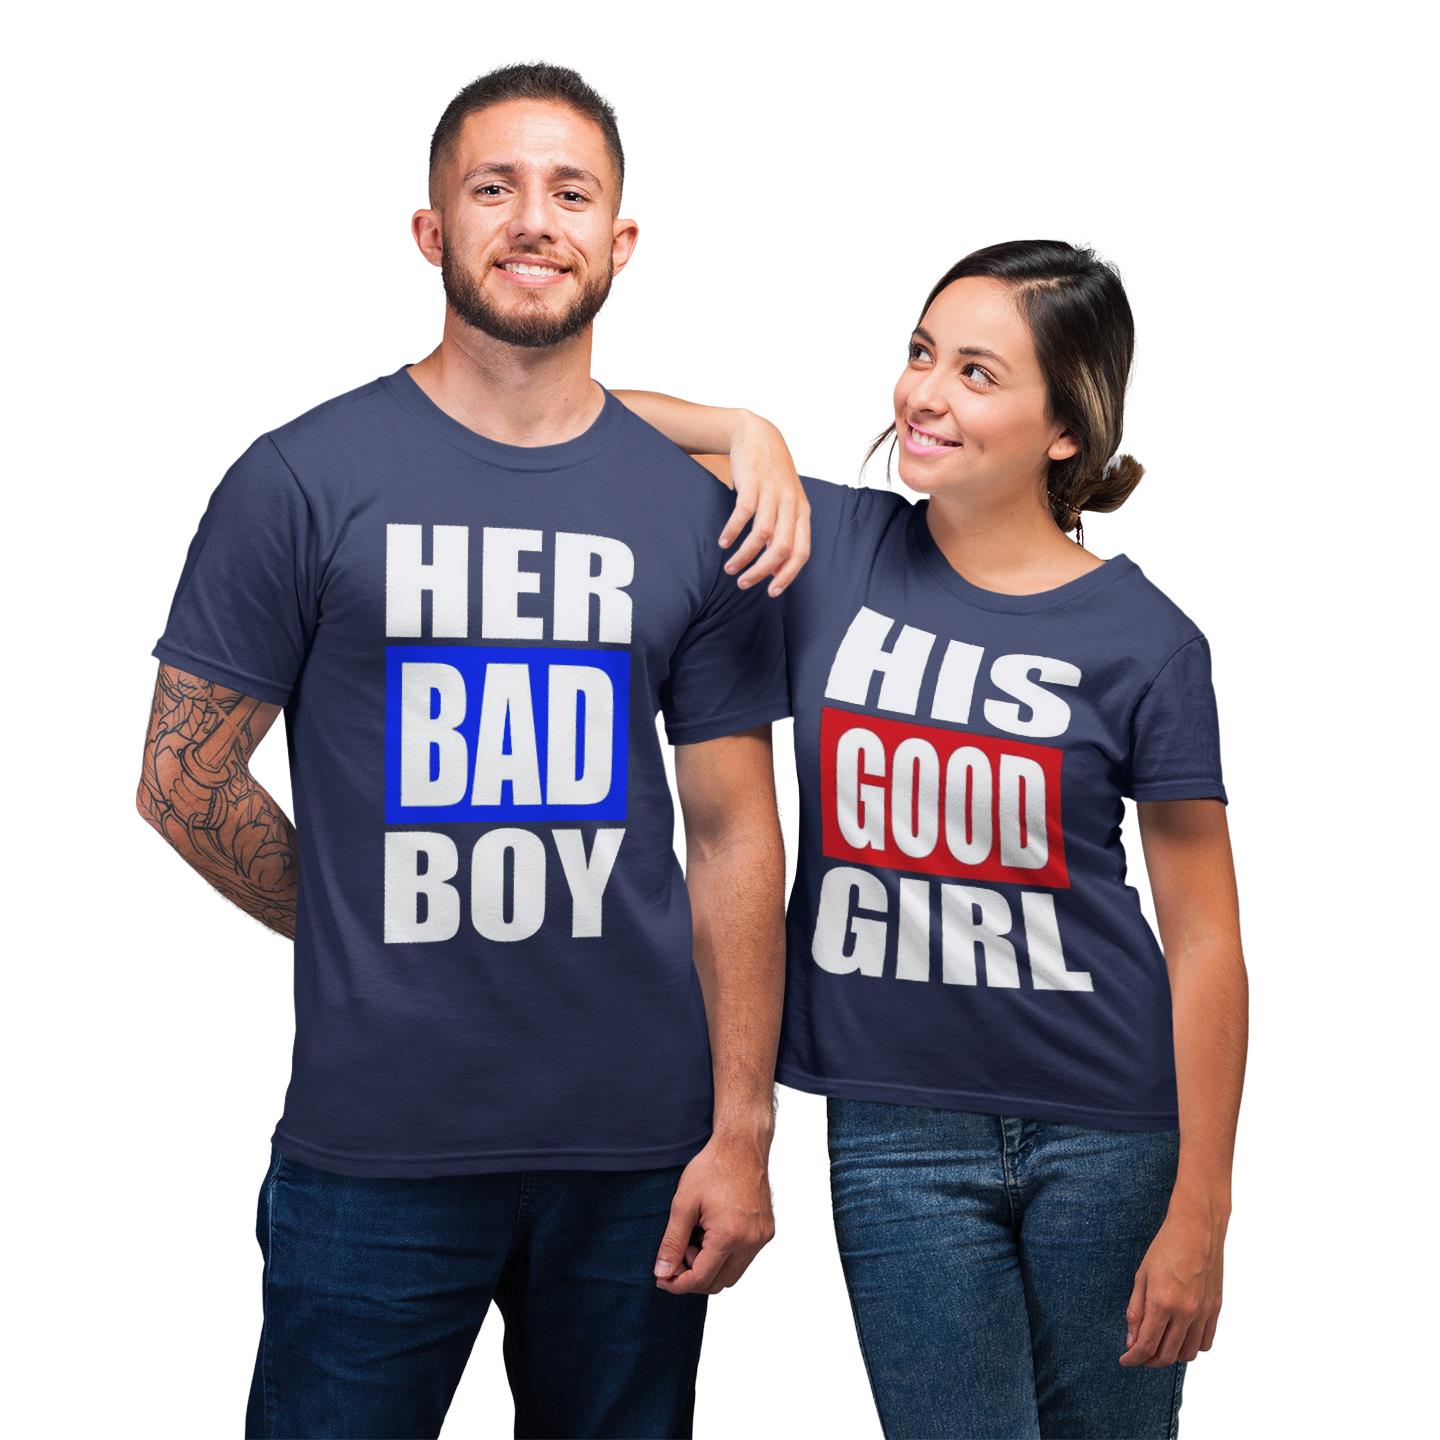 Her Bad Boy His Good Girl Funny Couples Shirt For Lover Matching T-shirt